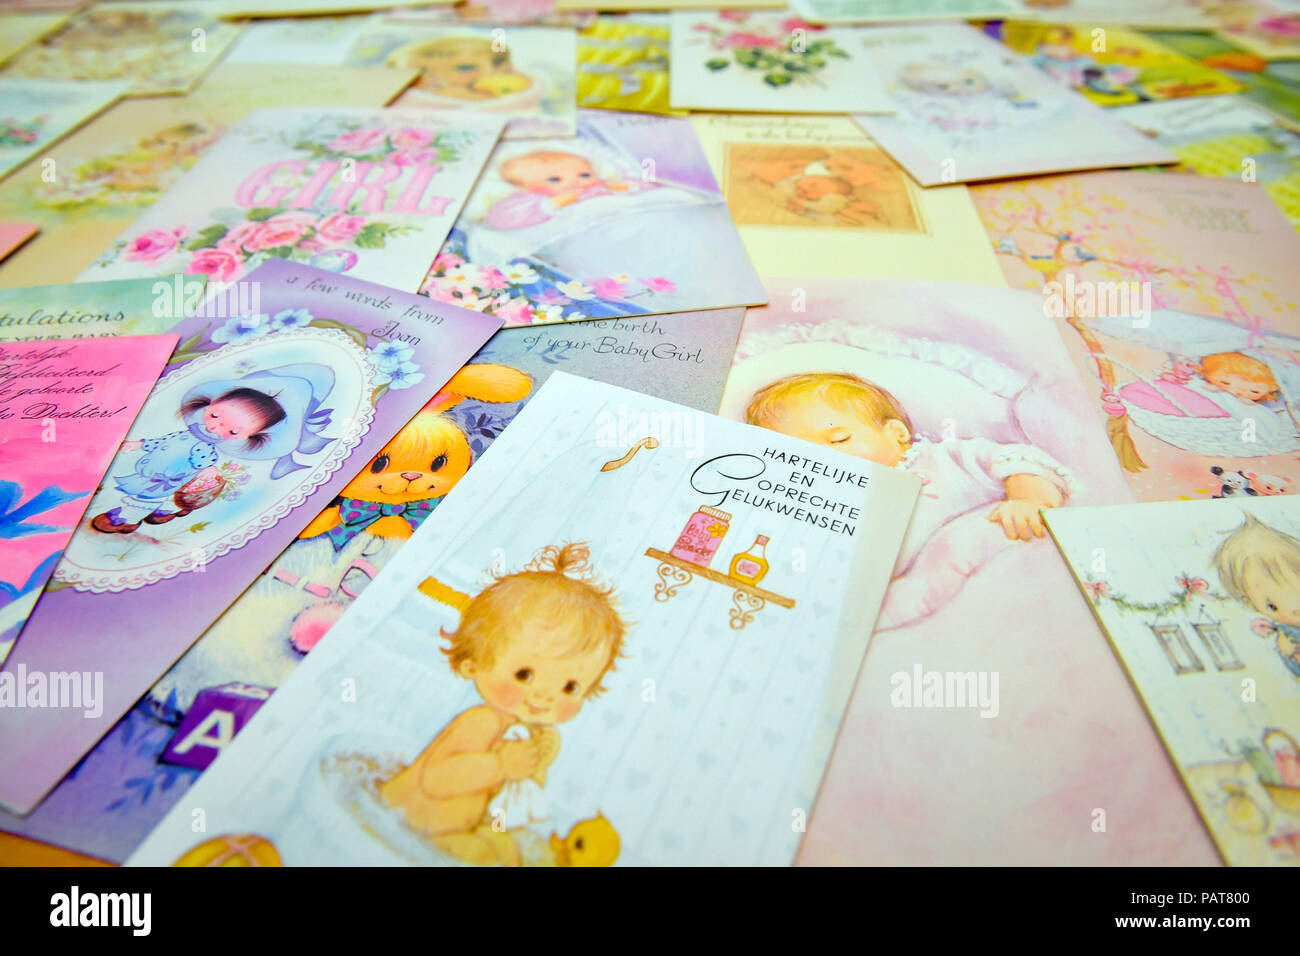 Baby congratulation cards, which form part of the Lesley Brown archive, a collection of items kept by the mother of the world's first test tube baby, Louise Brown, who is celebrating her 40th birthday on Wednesday. Stock Photo